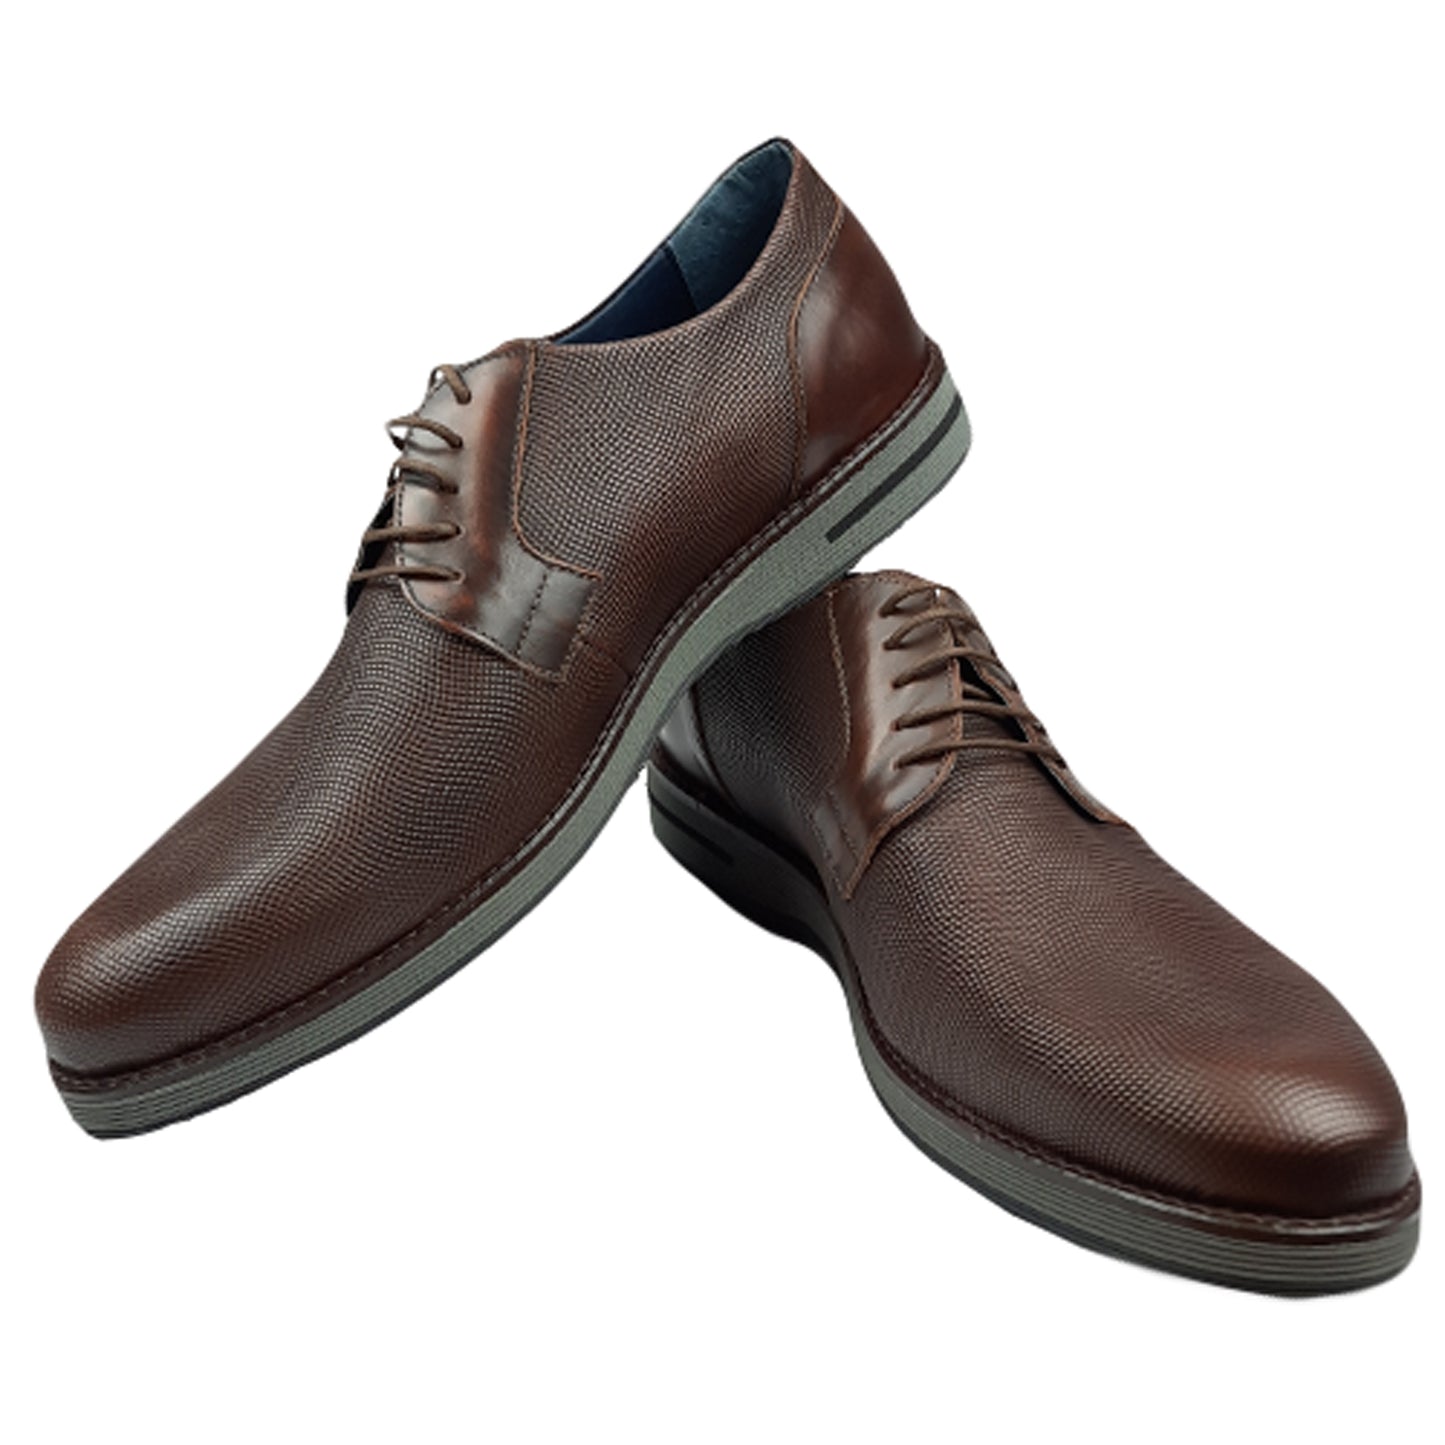 Handmade Lace Ups Shoes Brown Leather 811 BROWN